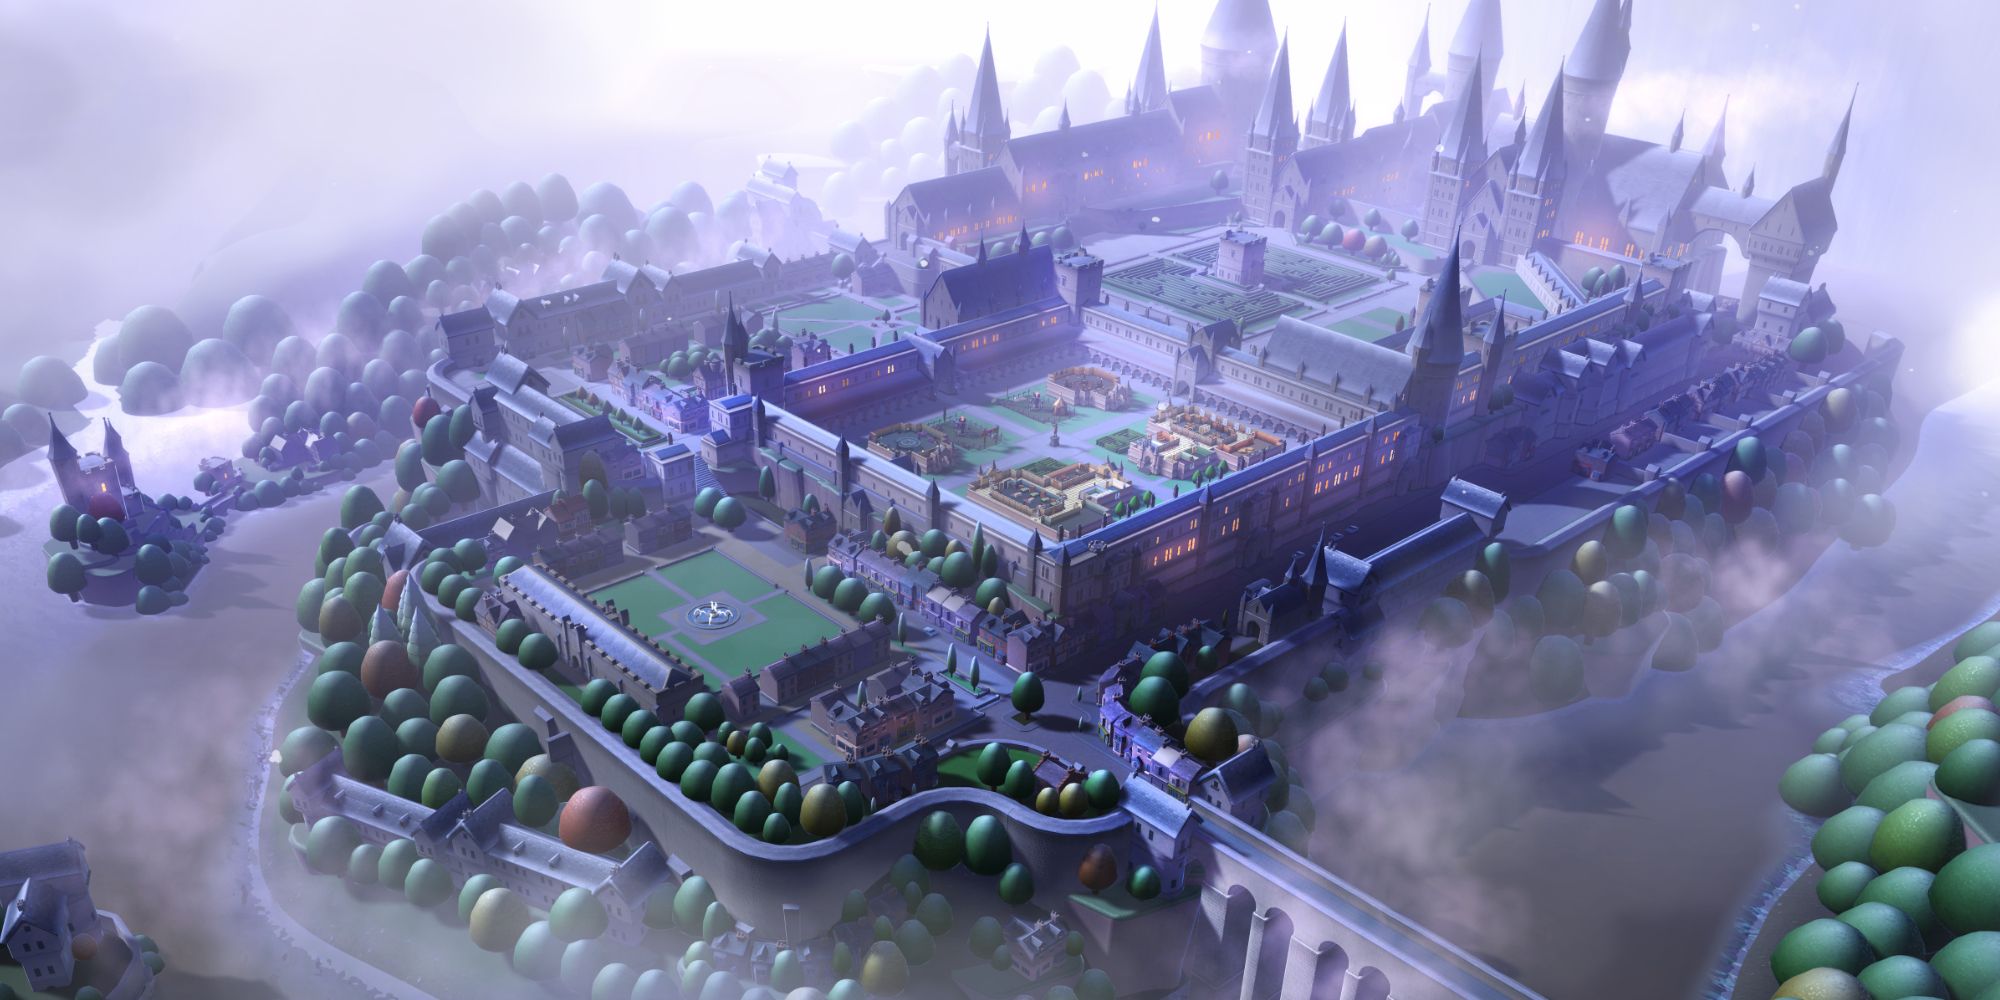 TPC wizard campus surrounded by fog